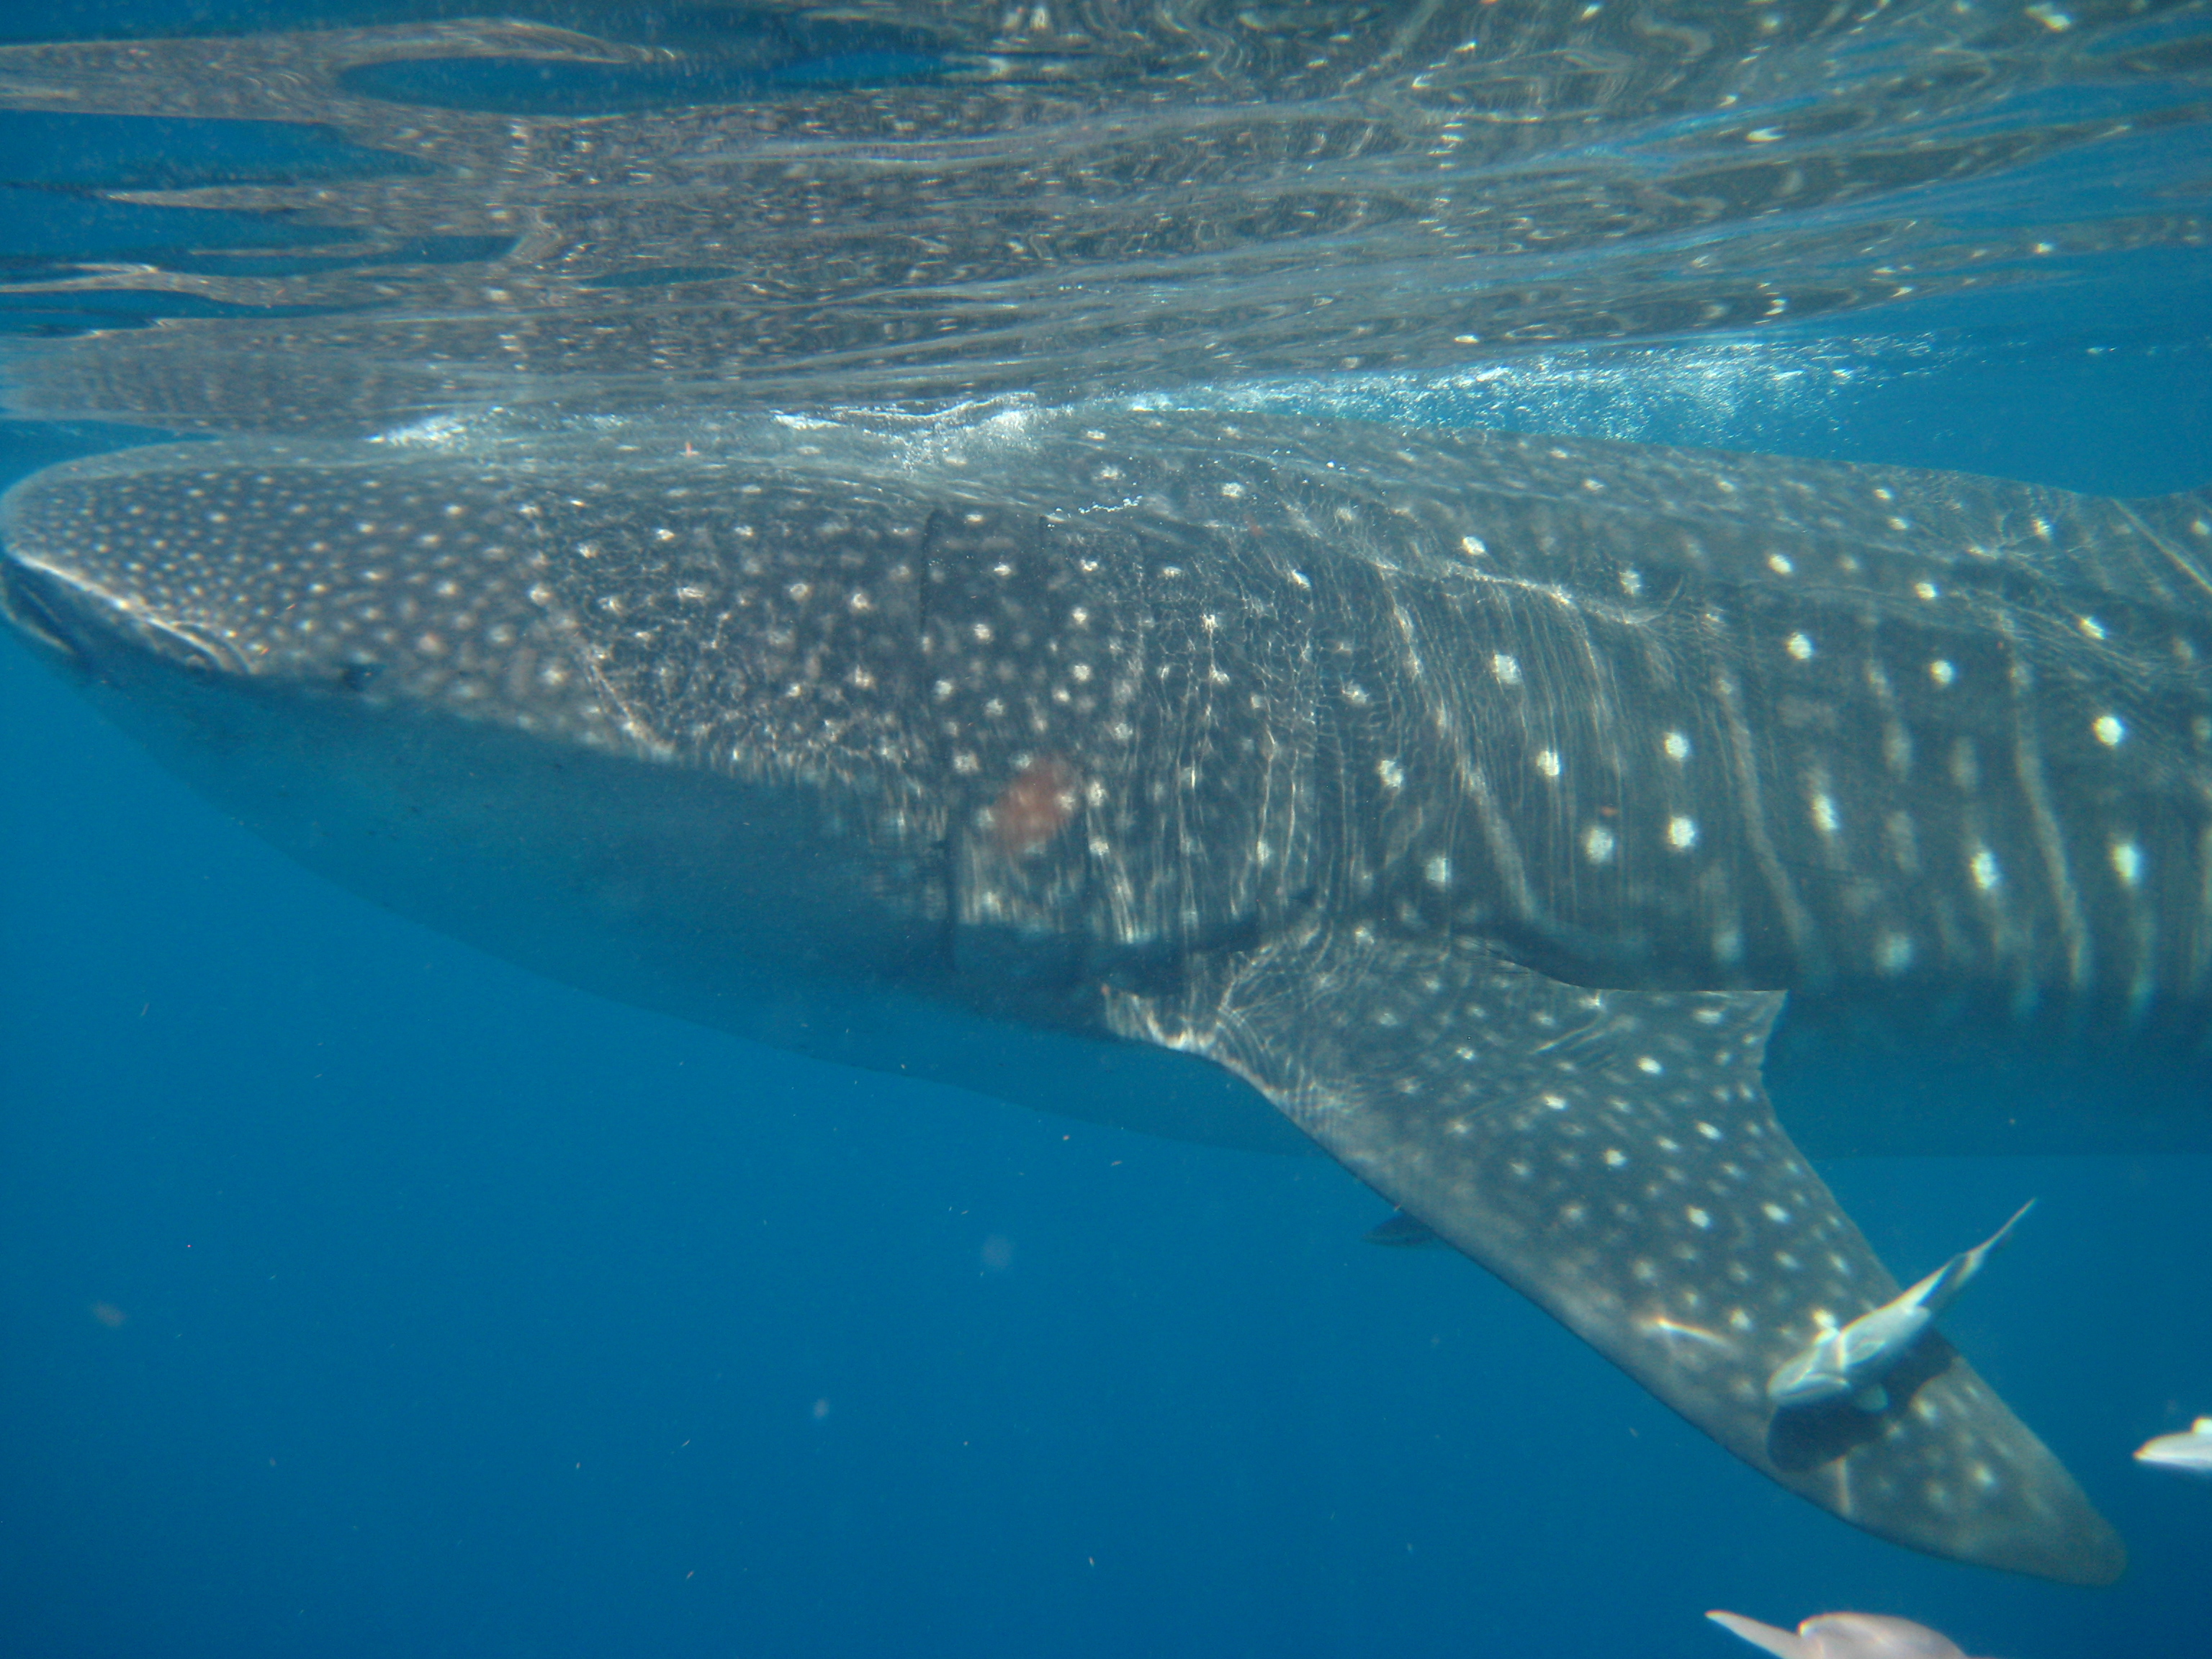 Image: New Publication Highlights Whale Shark Movements in the Gulf of Mexico 